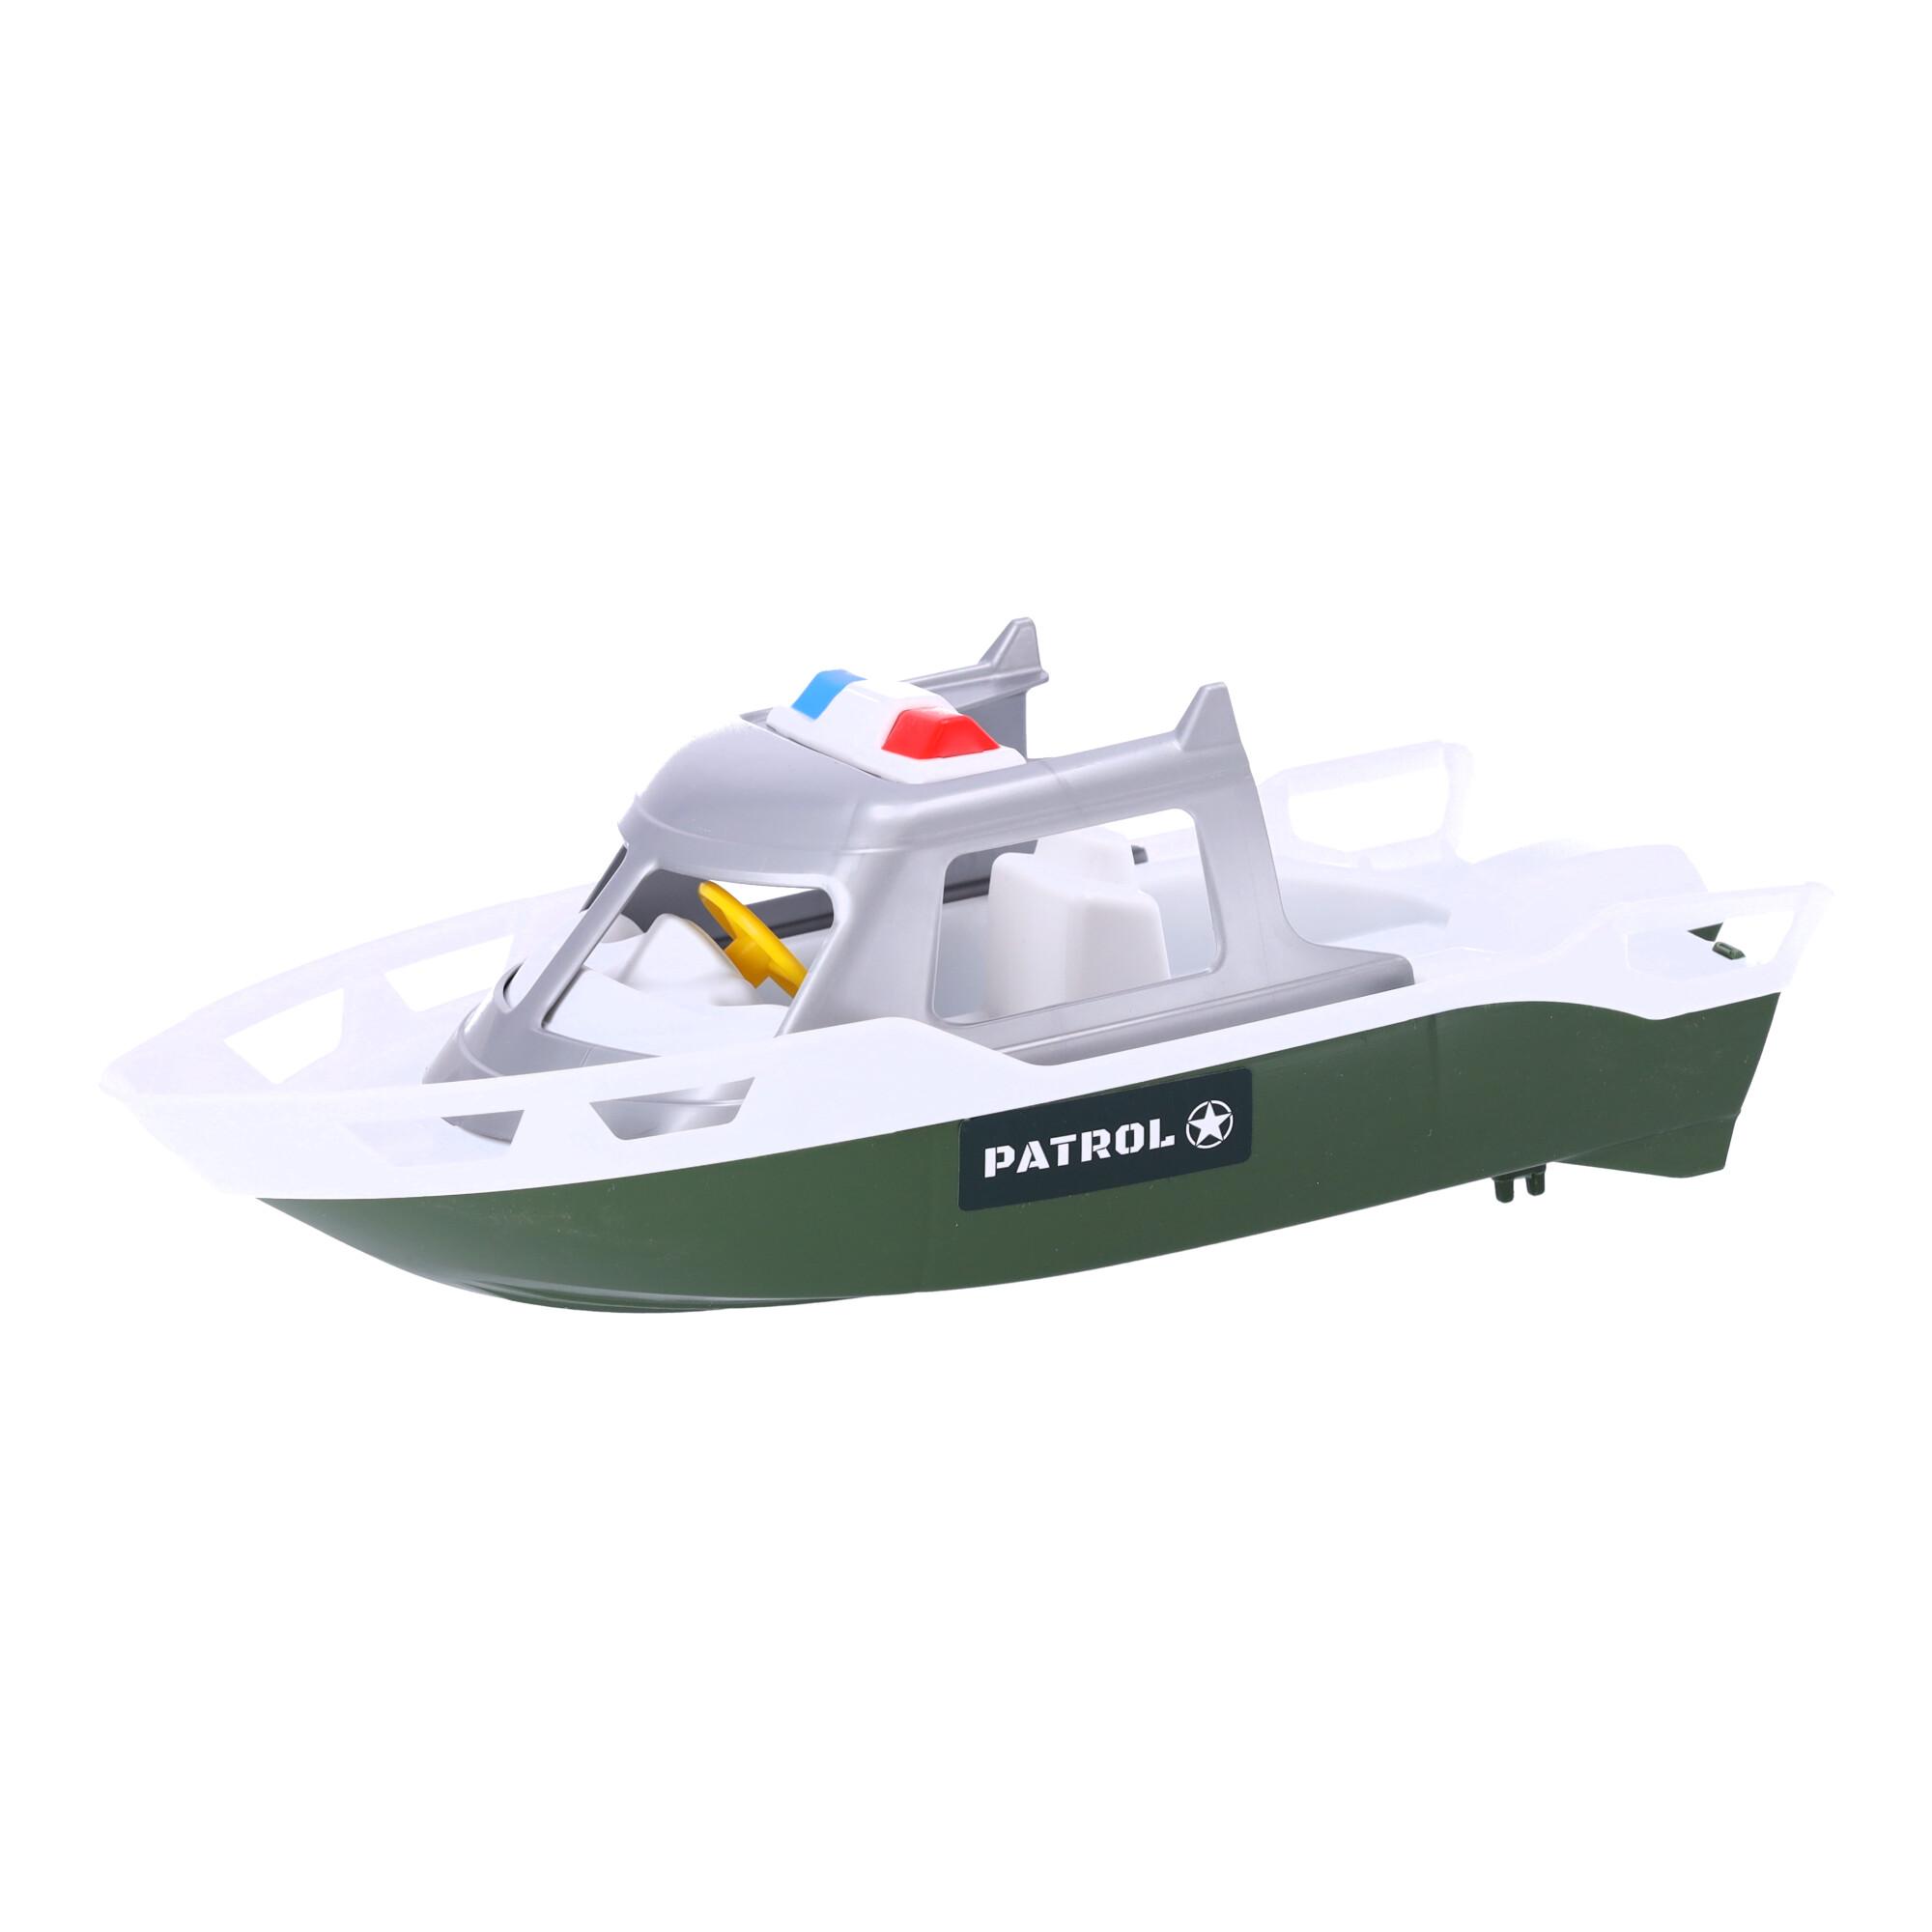 Motorboat Patrol, a toy for children